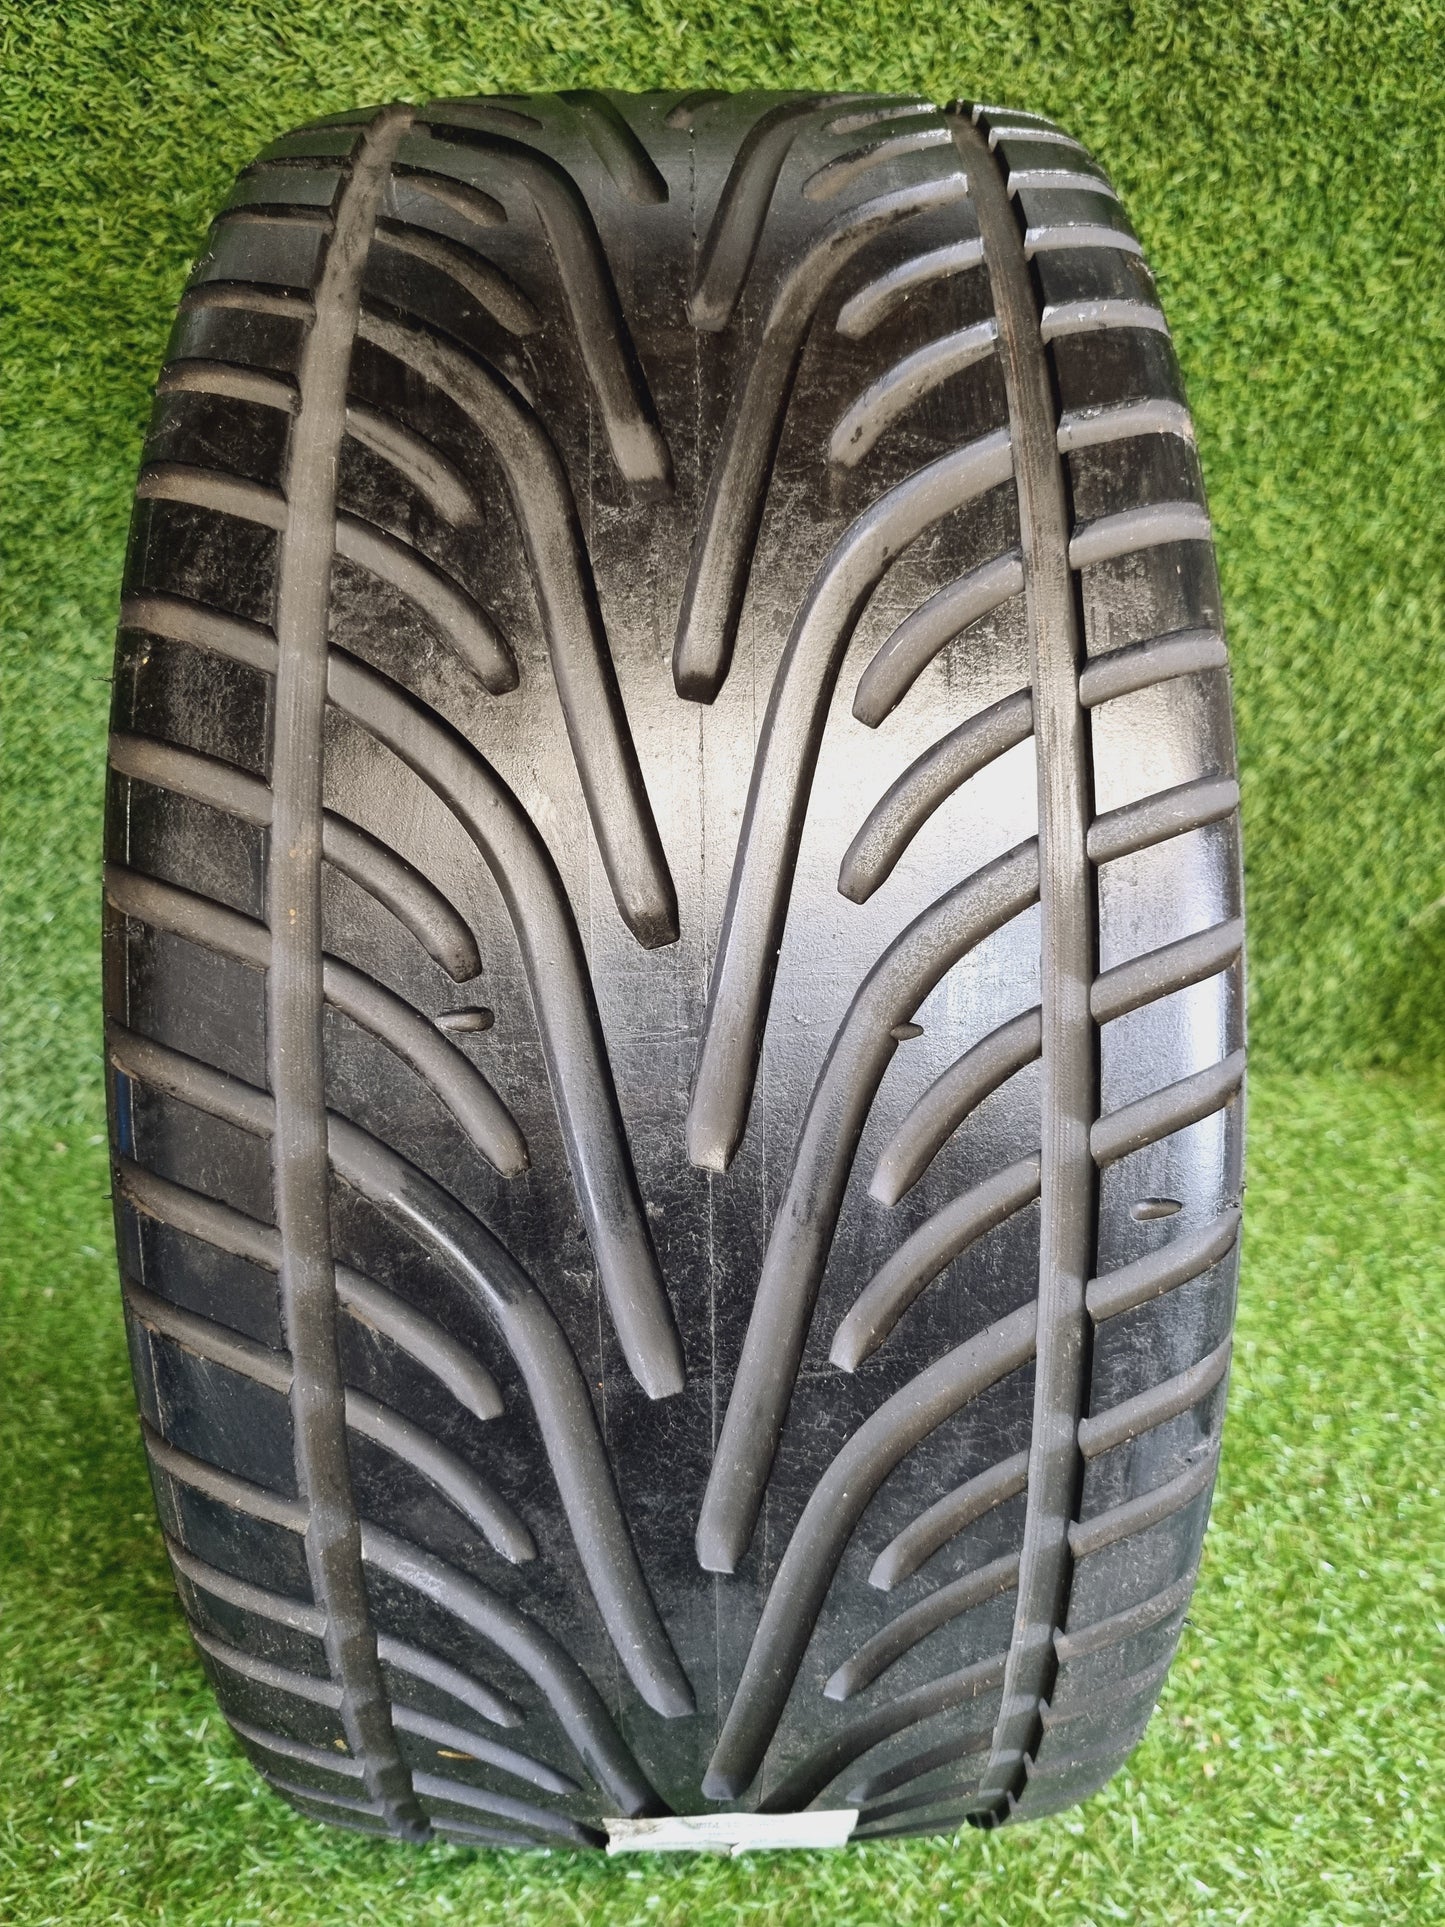 Goodyear (Dunlop) 300/66/18 NEW Wet Tyre (1 Only)